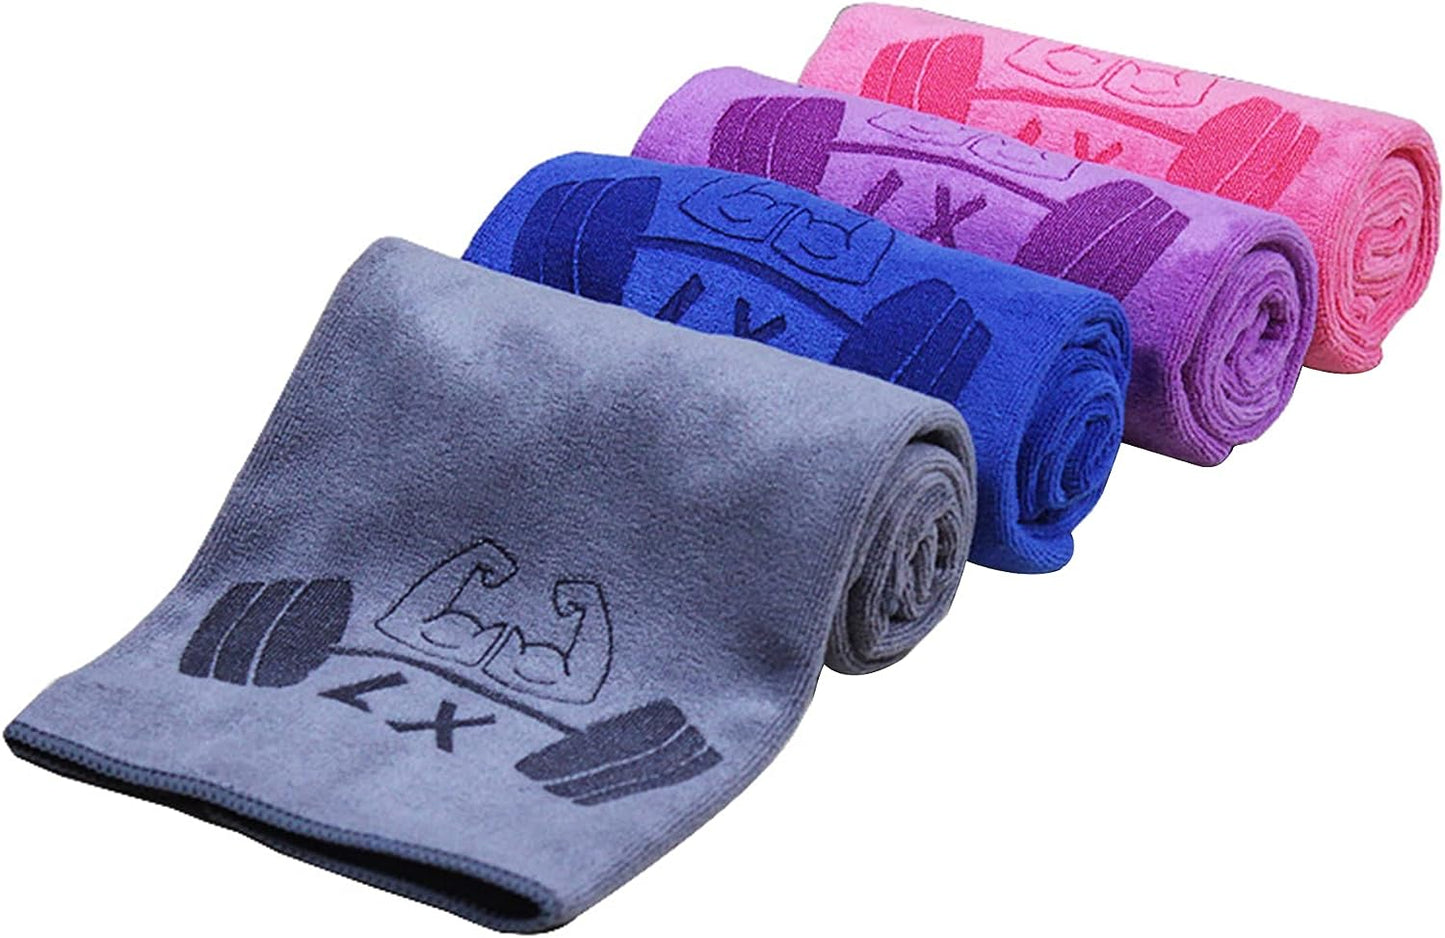 SPORT LXMOJITU 4Pack Cotton Yoga Towel(13.7" x 27.5"), Gym Towel Set, Cool Waffle Pattern Towel for Neck and Face, Soft Breathable Towel for Yoga, Sports, Kitchen, Camping, Running, Workout